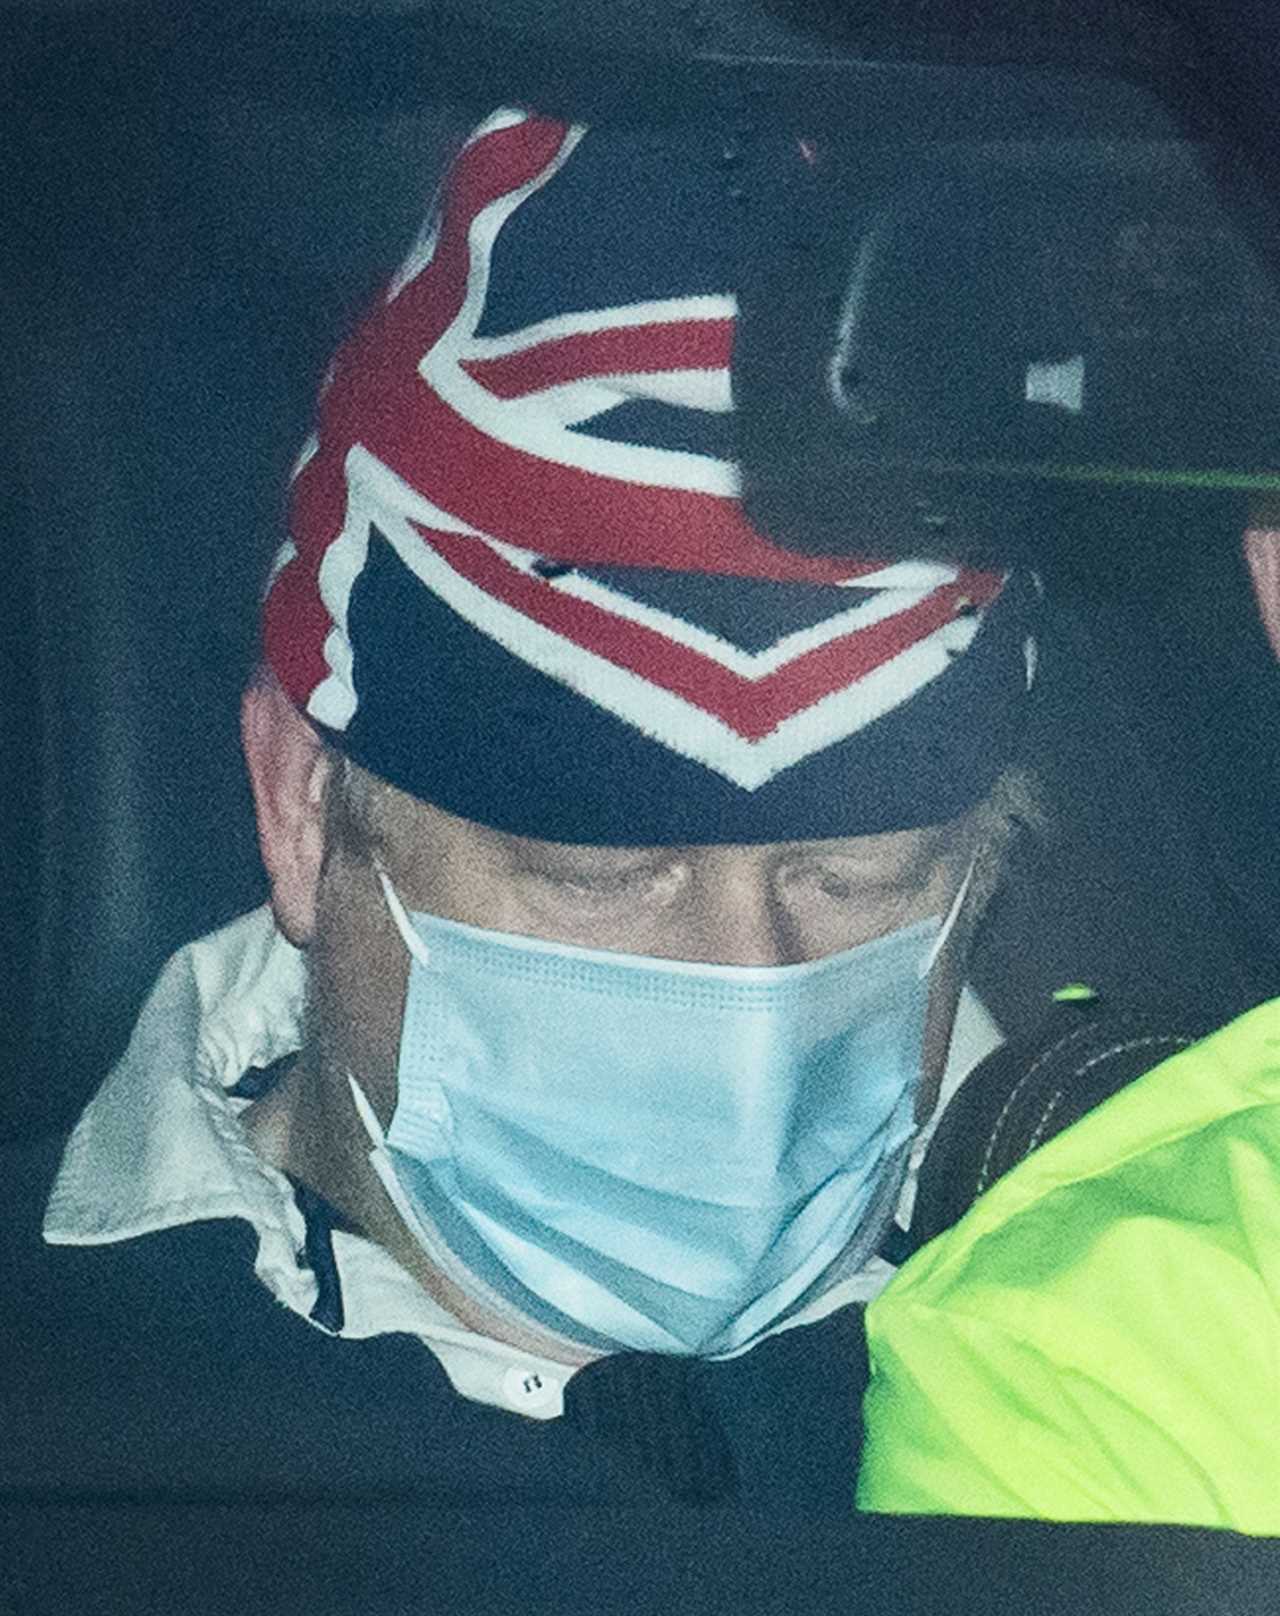 Boris Johnson holds meeting TODAY to decide whether to bring in new coronavirus lockdown amid Christmas travel ban fears